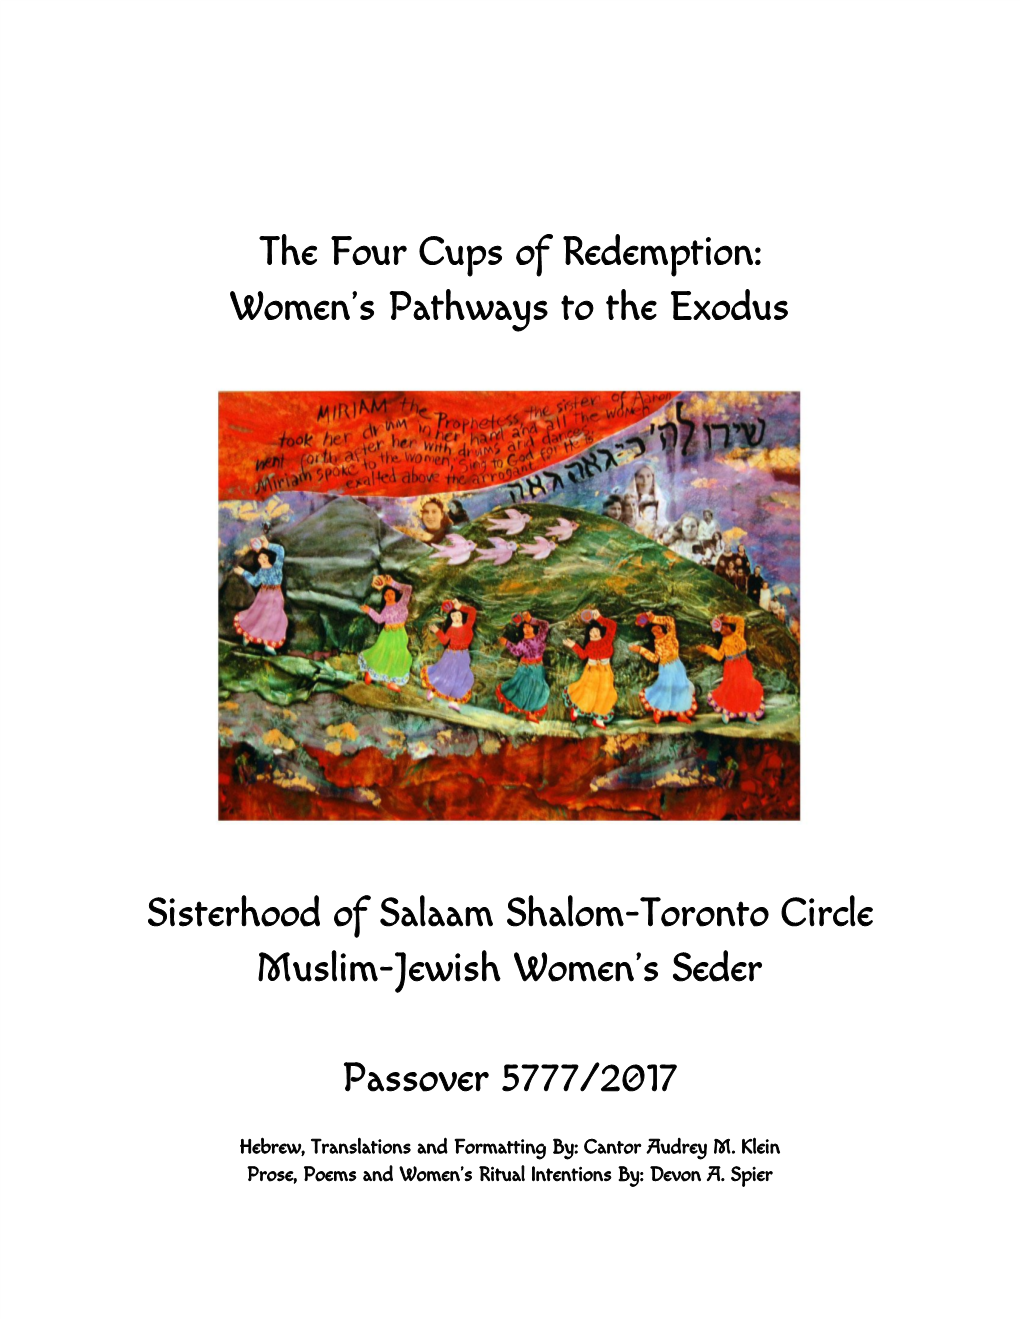 The Four Cups of Redemption: Women's Pathways To